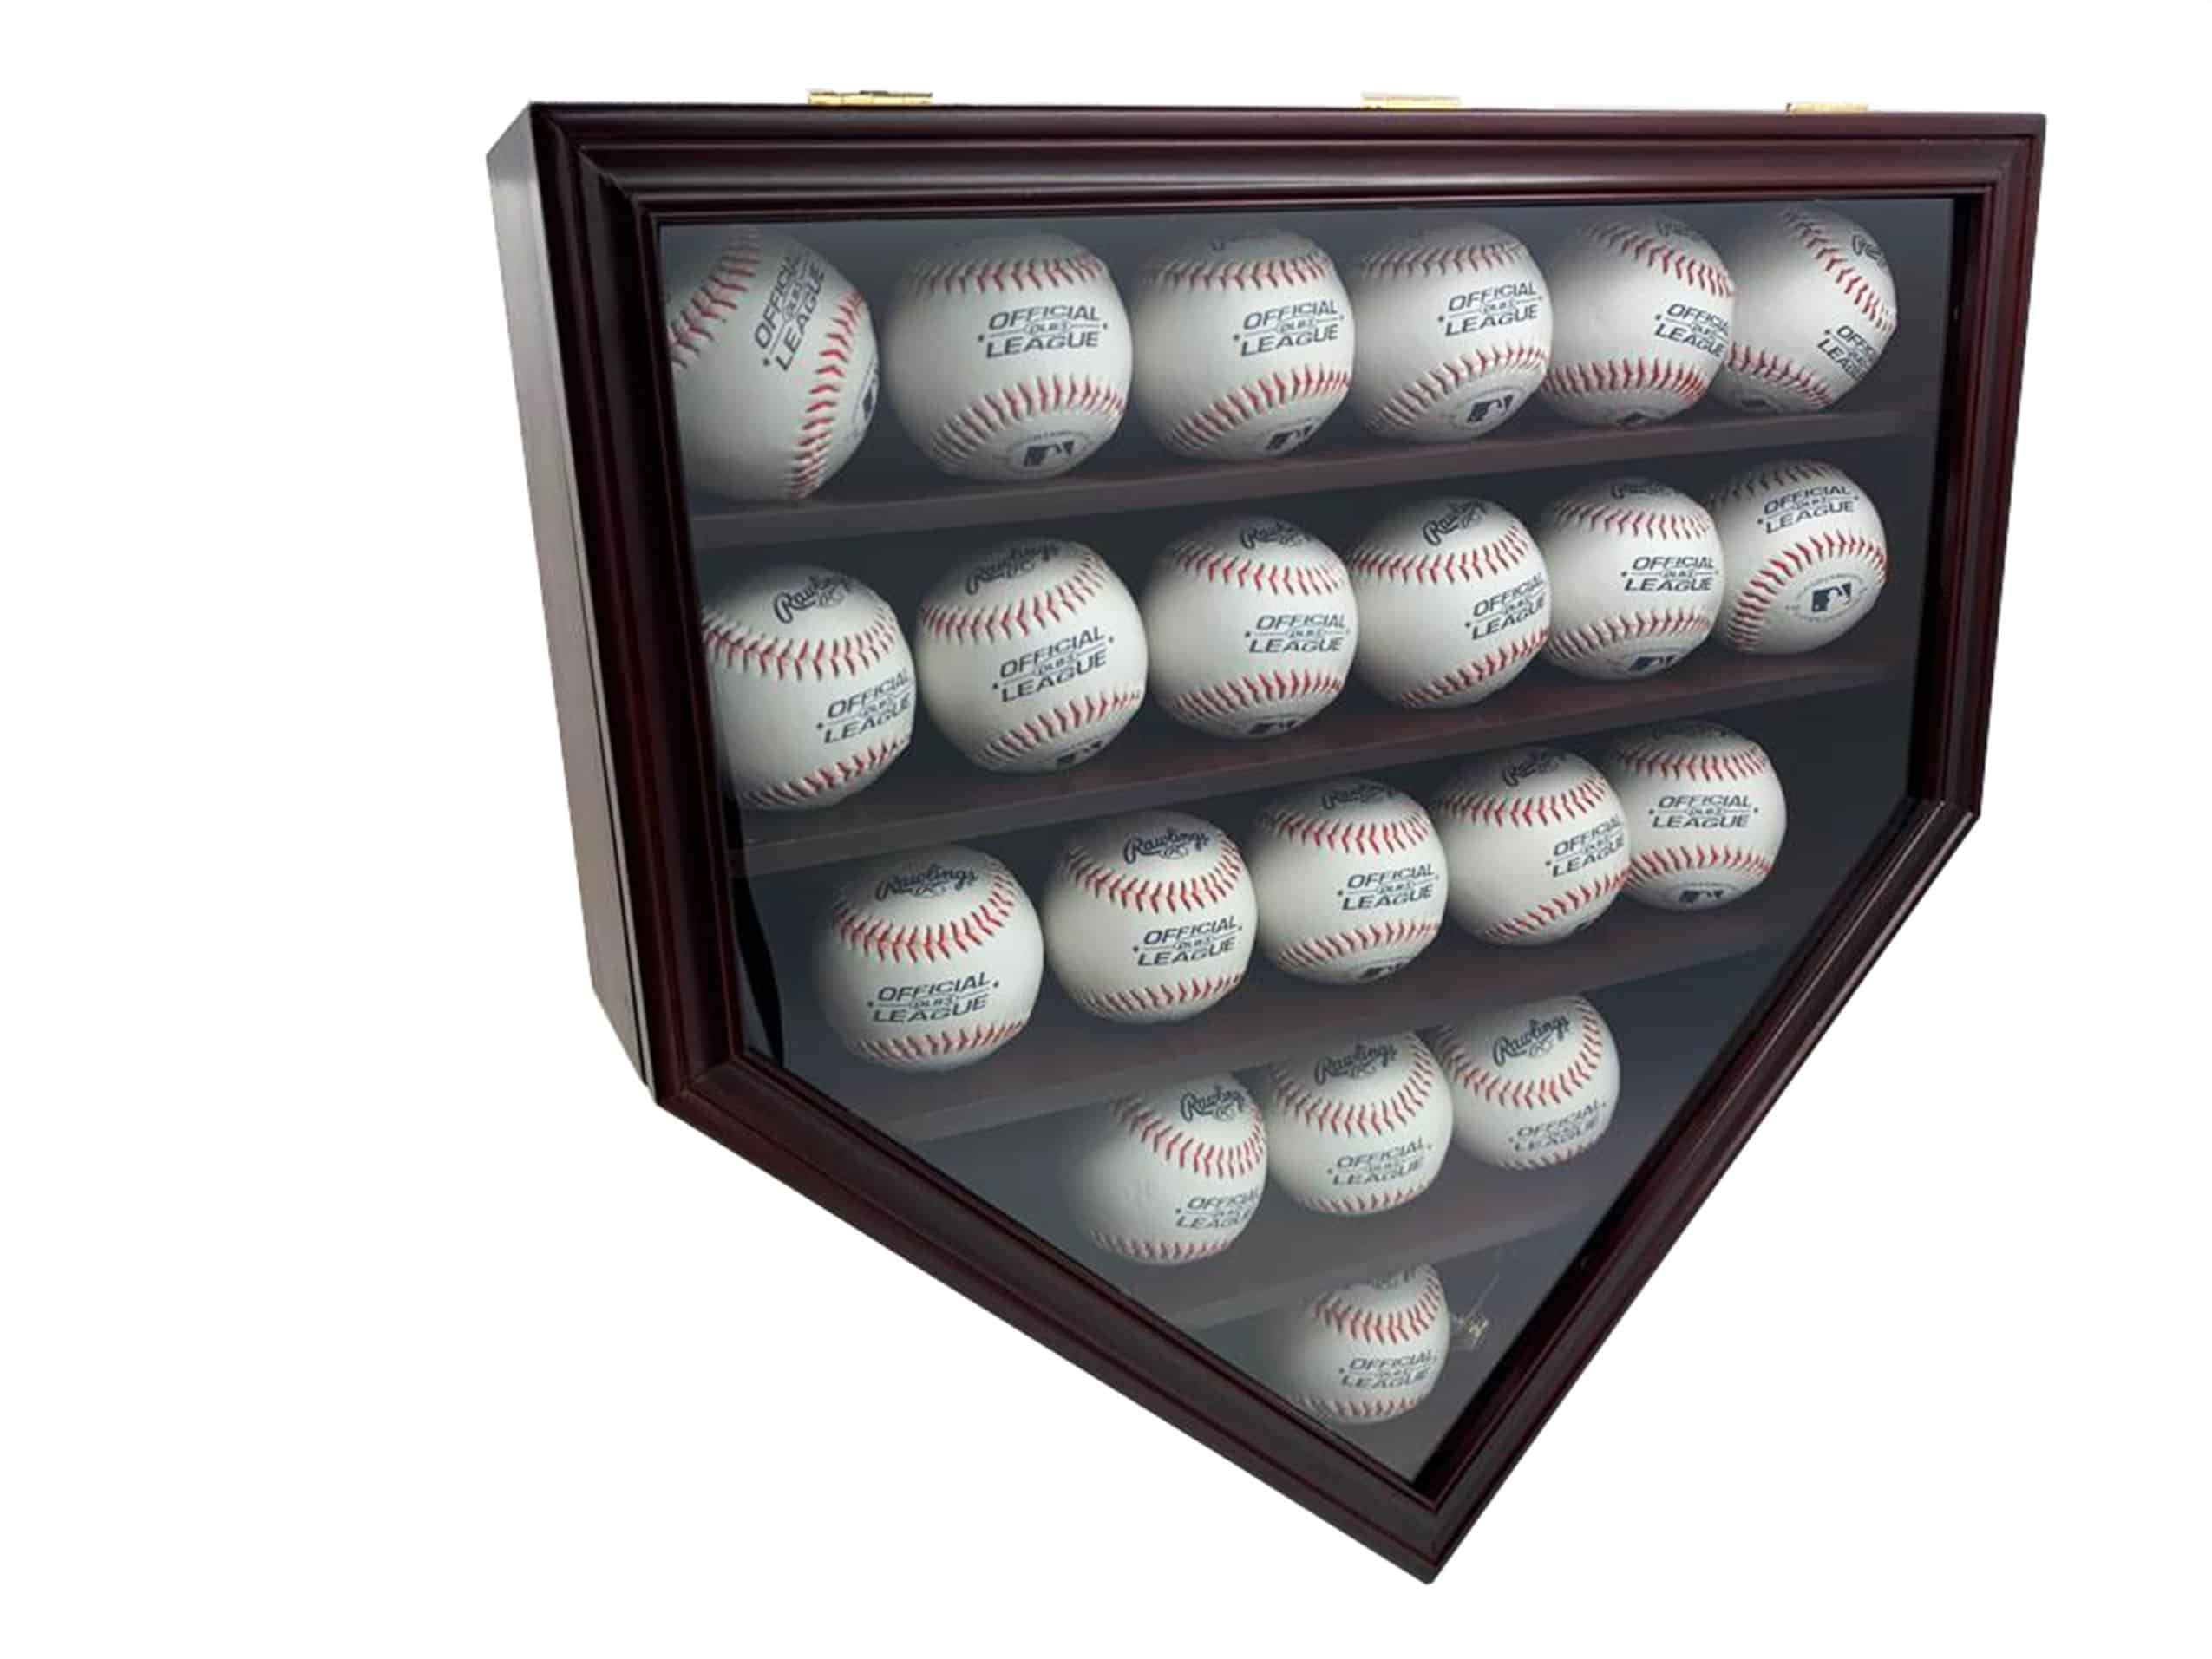 DECOMIL - Ultra Clear UV Protection Baseball / Football Jersey Frame Display Case Shadow Box, Cherry